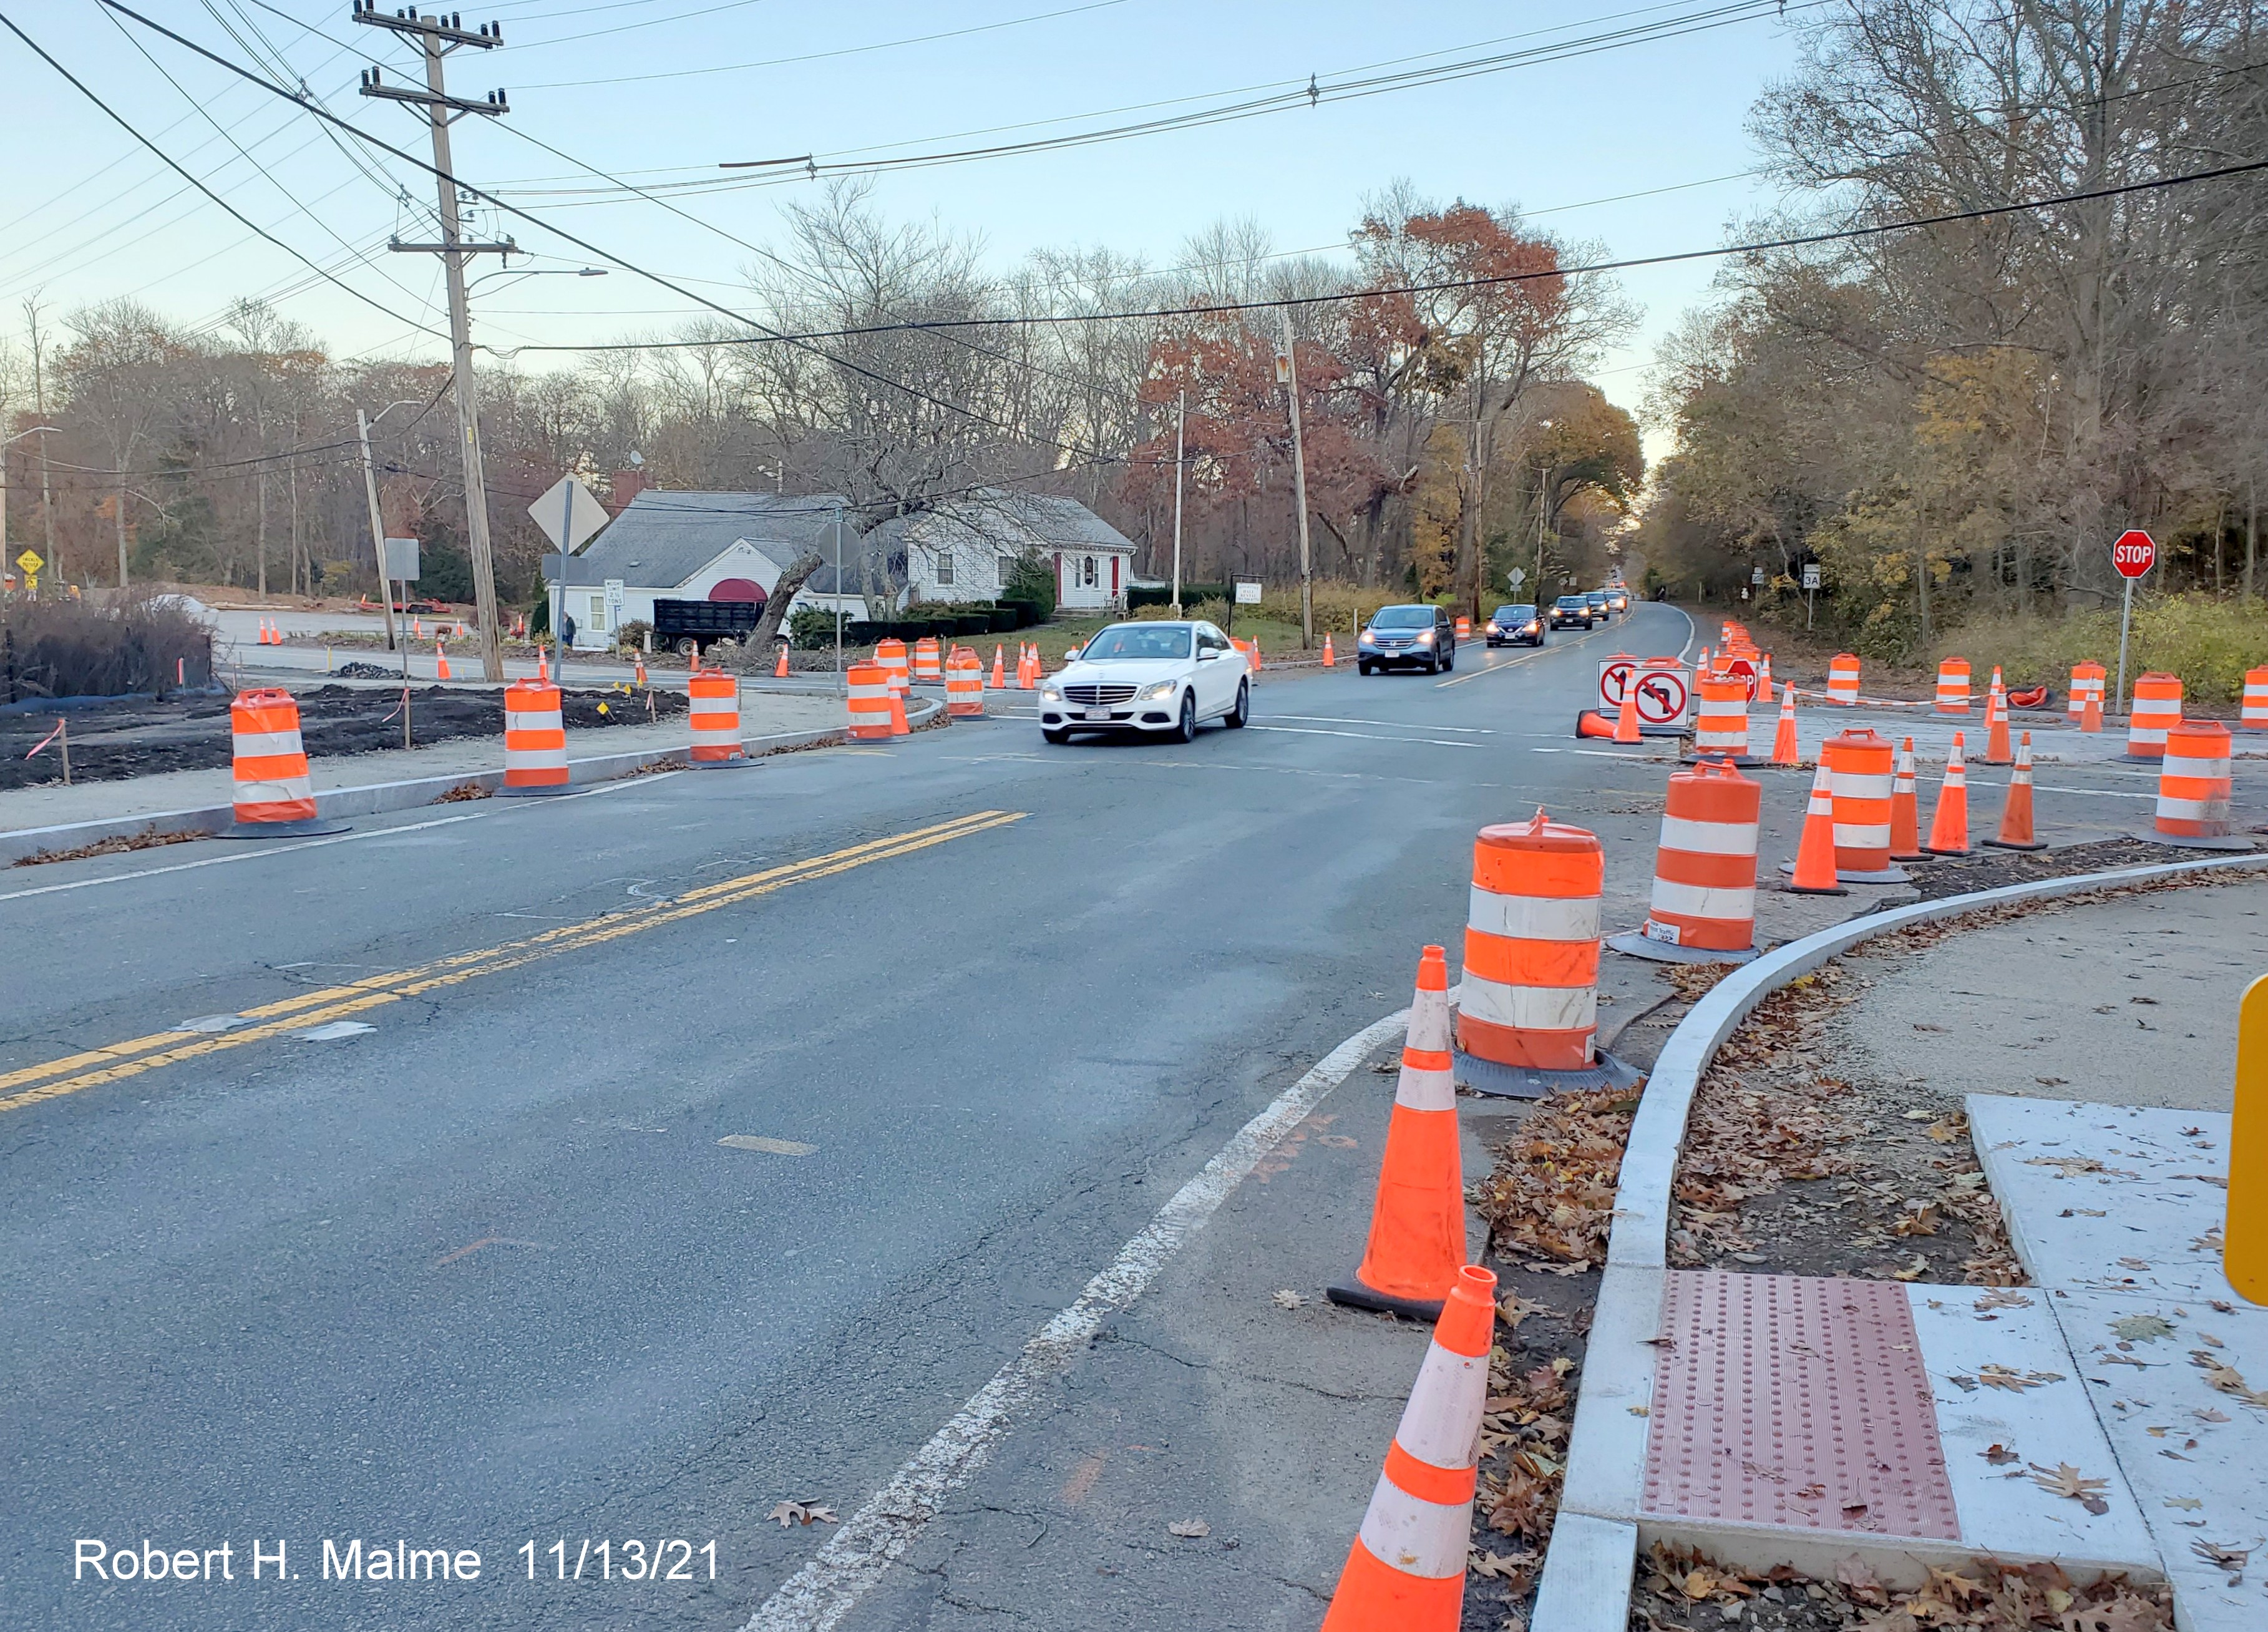 Image of sidewalks awaiting paving on both sides of intersection of Kilby Street and Chief Justice Cushing Highway (MA 3A) in Hingham, November 2021